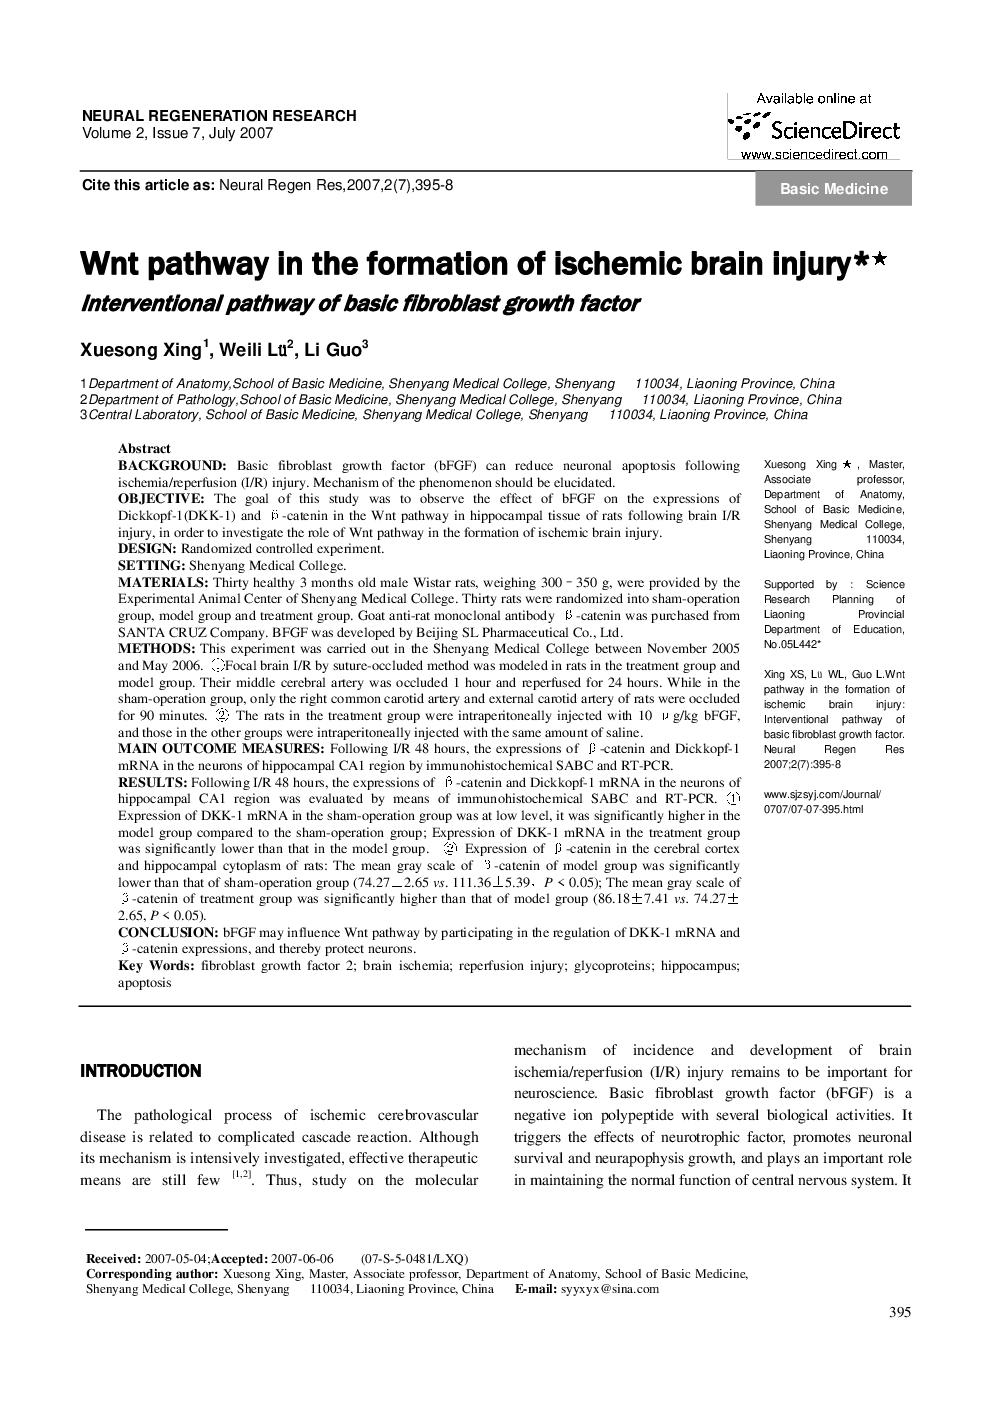 Wnt pathway in the formation of ischemic brain injury*